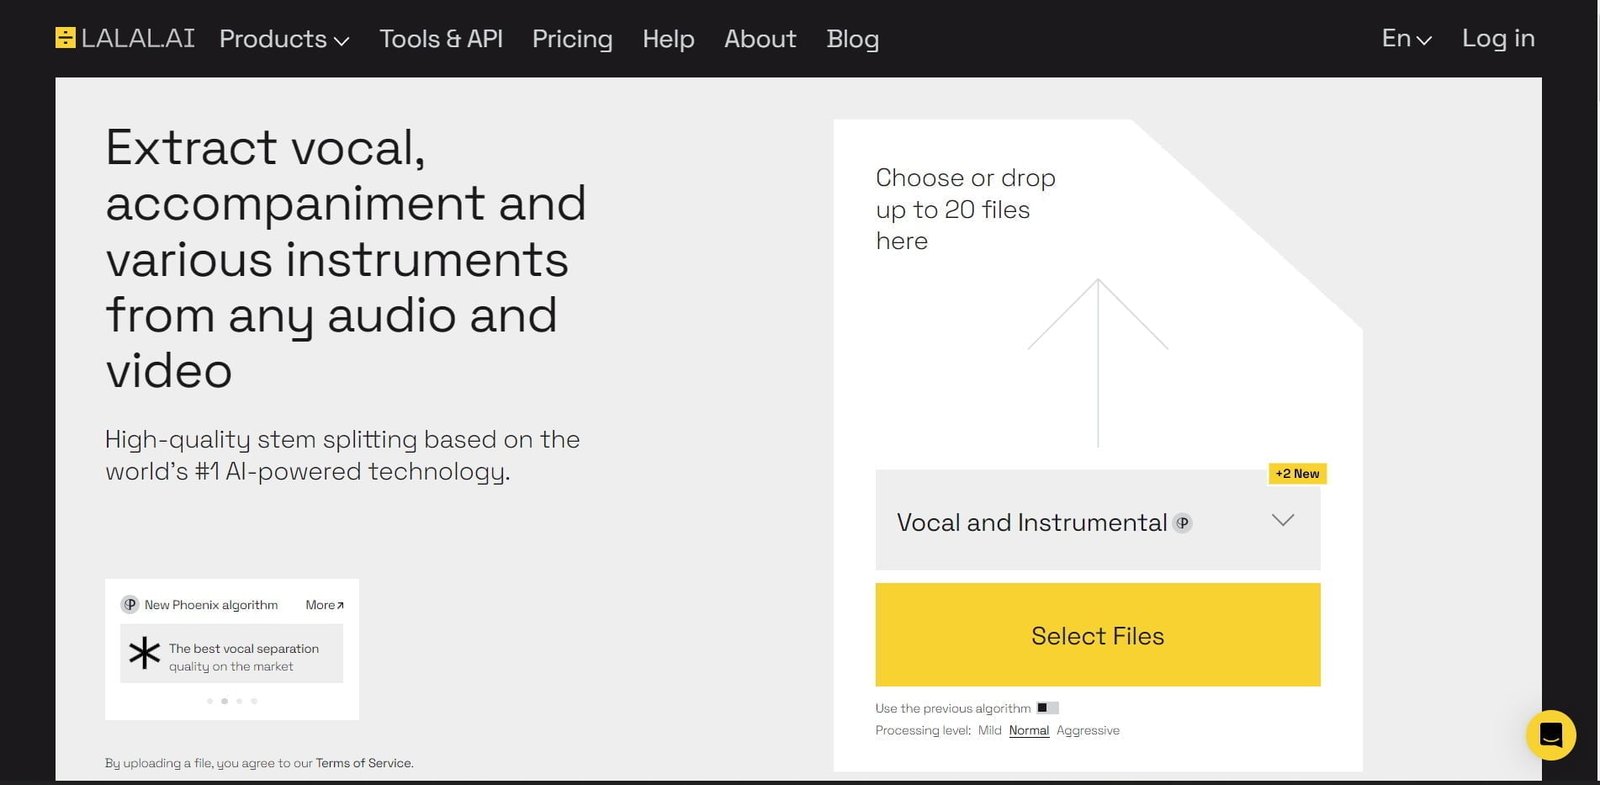 LALAL.AI is an AI audio and vocal remover tool to extract vocal